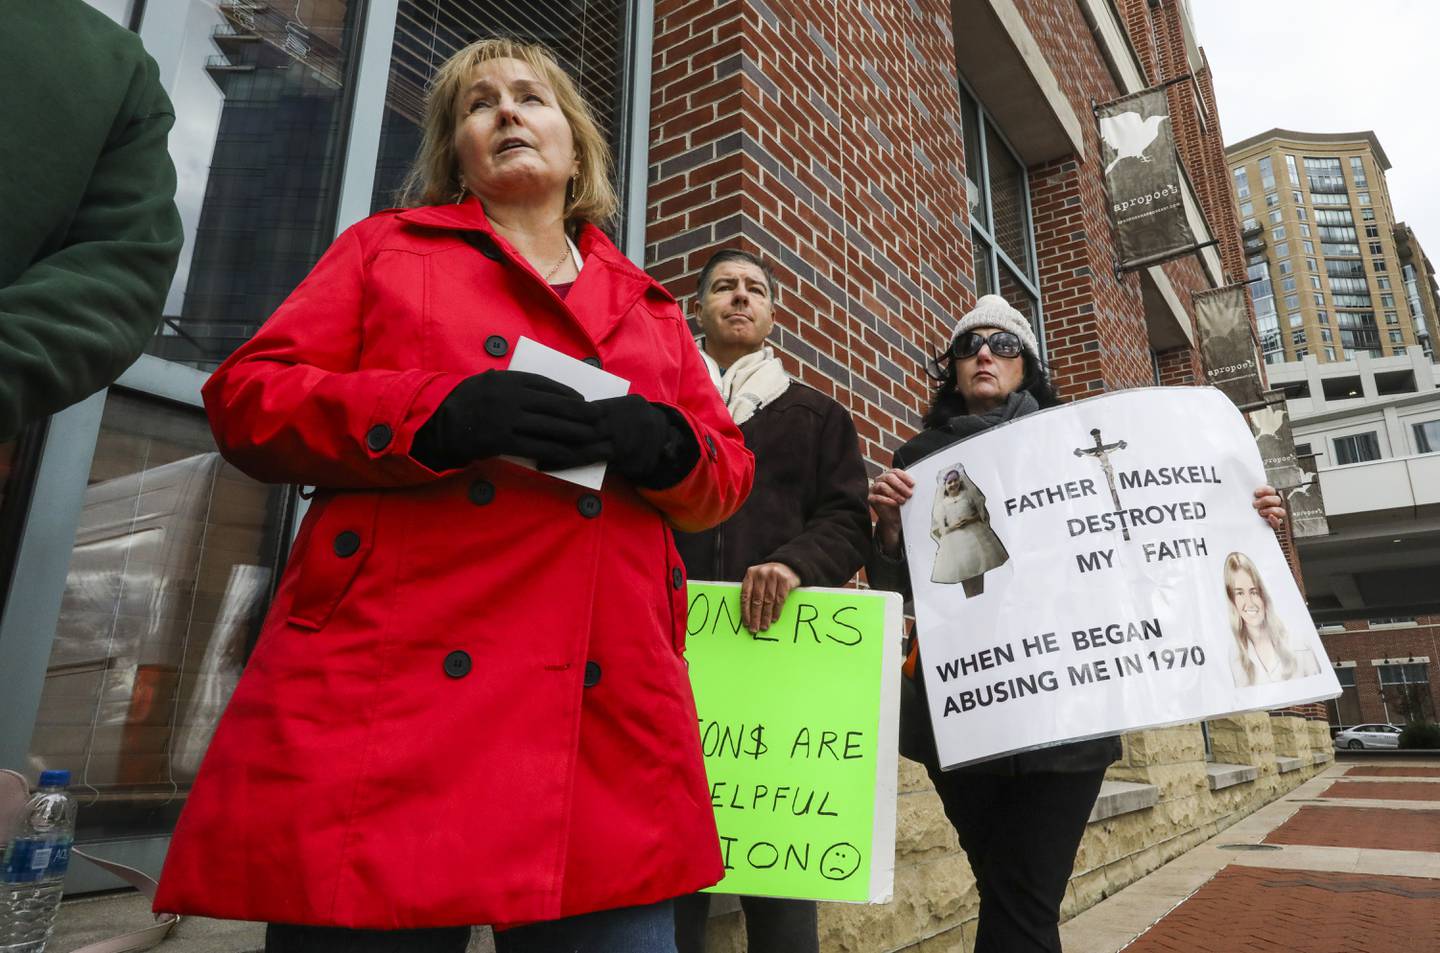 Survivors Network of those Abused by Priests (SNAP) Maryland member Teresa Lancaster during a press conference held outside of the Marriott to urge newly elected Archbishop Timothy Broglio to add clerics who abused men or women over the age of 25 to its list of perpetrators.